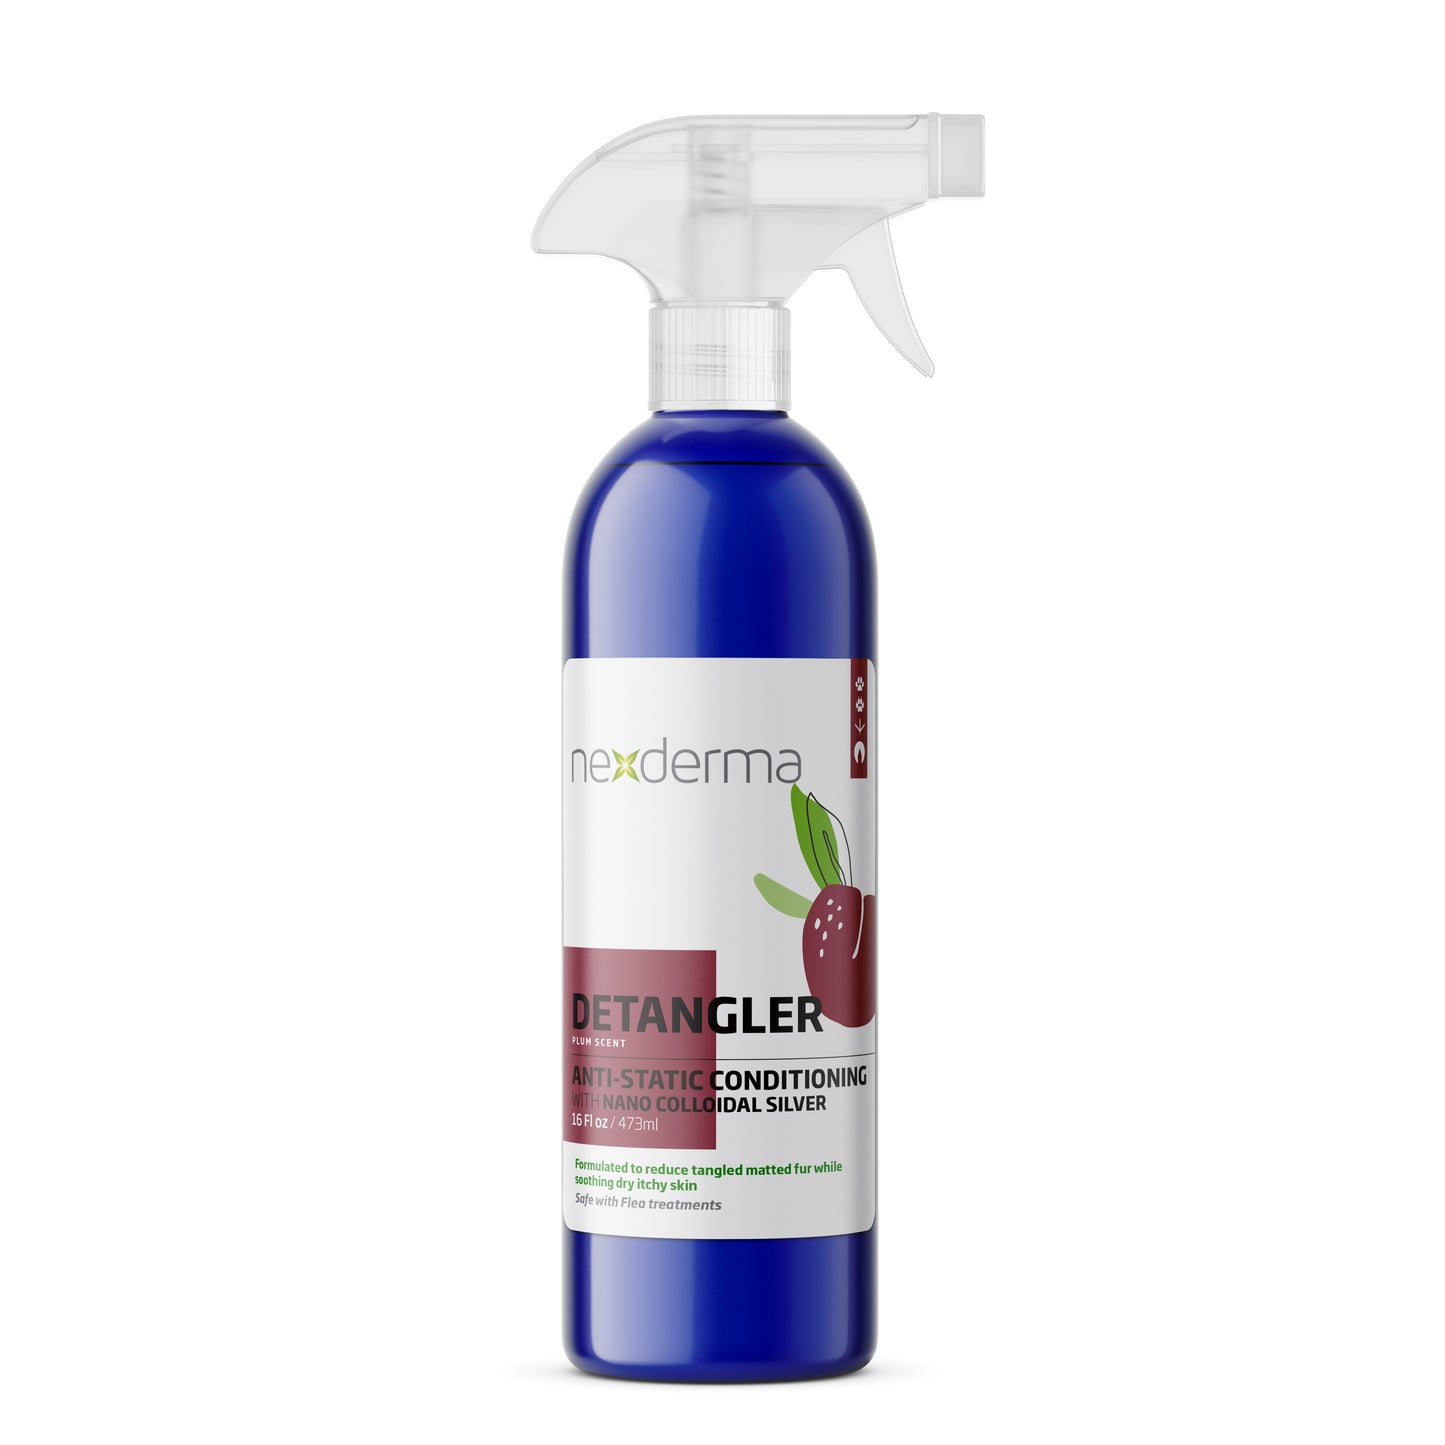 Nexderma's Anti-Static Detangling Conditioning Spray helps comb and de-tangle your pet's fur. No added chemical, safe on all skin types, and silver nanoparticles provide natural antifungal and antimicrobial protection to guard against skin issues, fungal infections, wounds, and more.  Plum 16 oz.